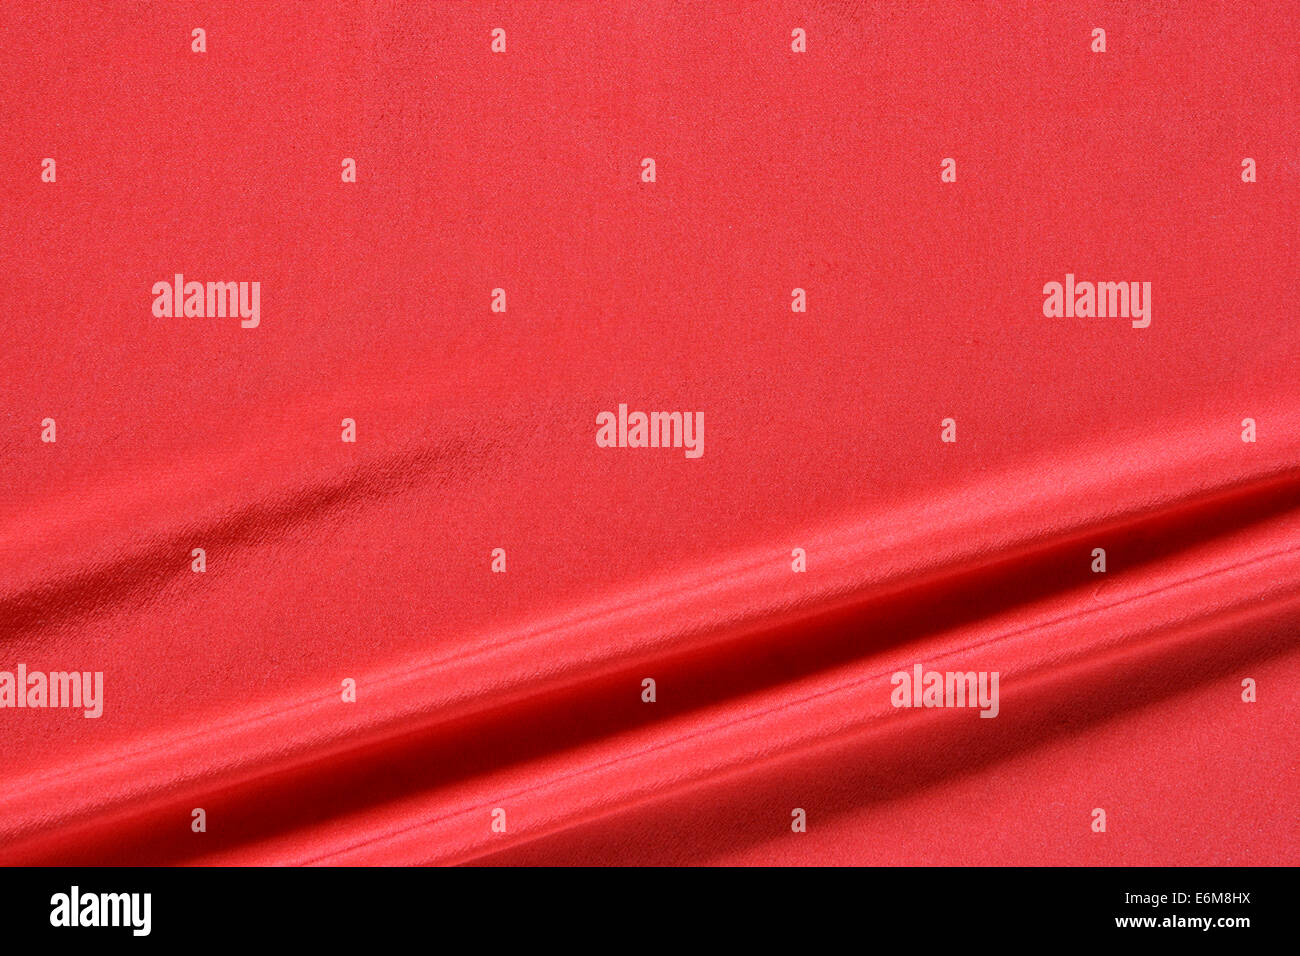 Red fabric background with space for text on top Stock Photo